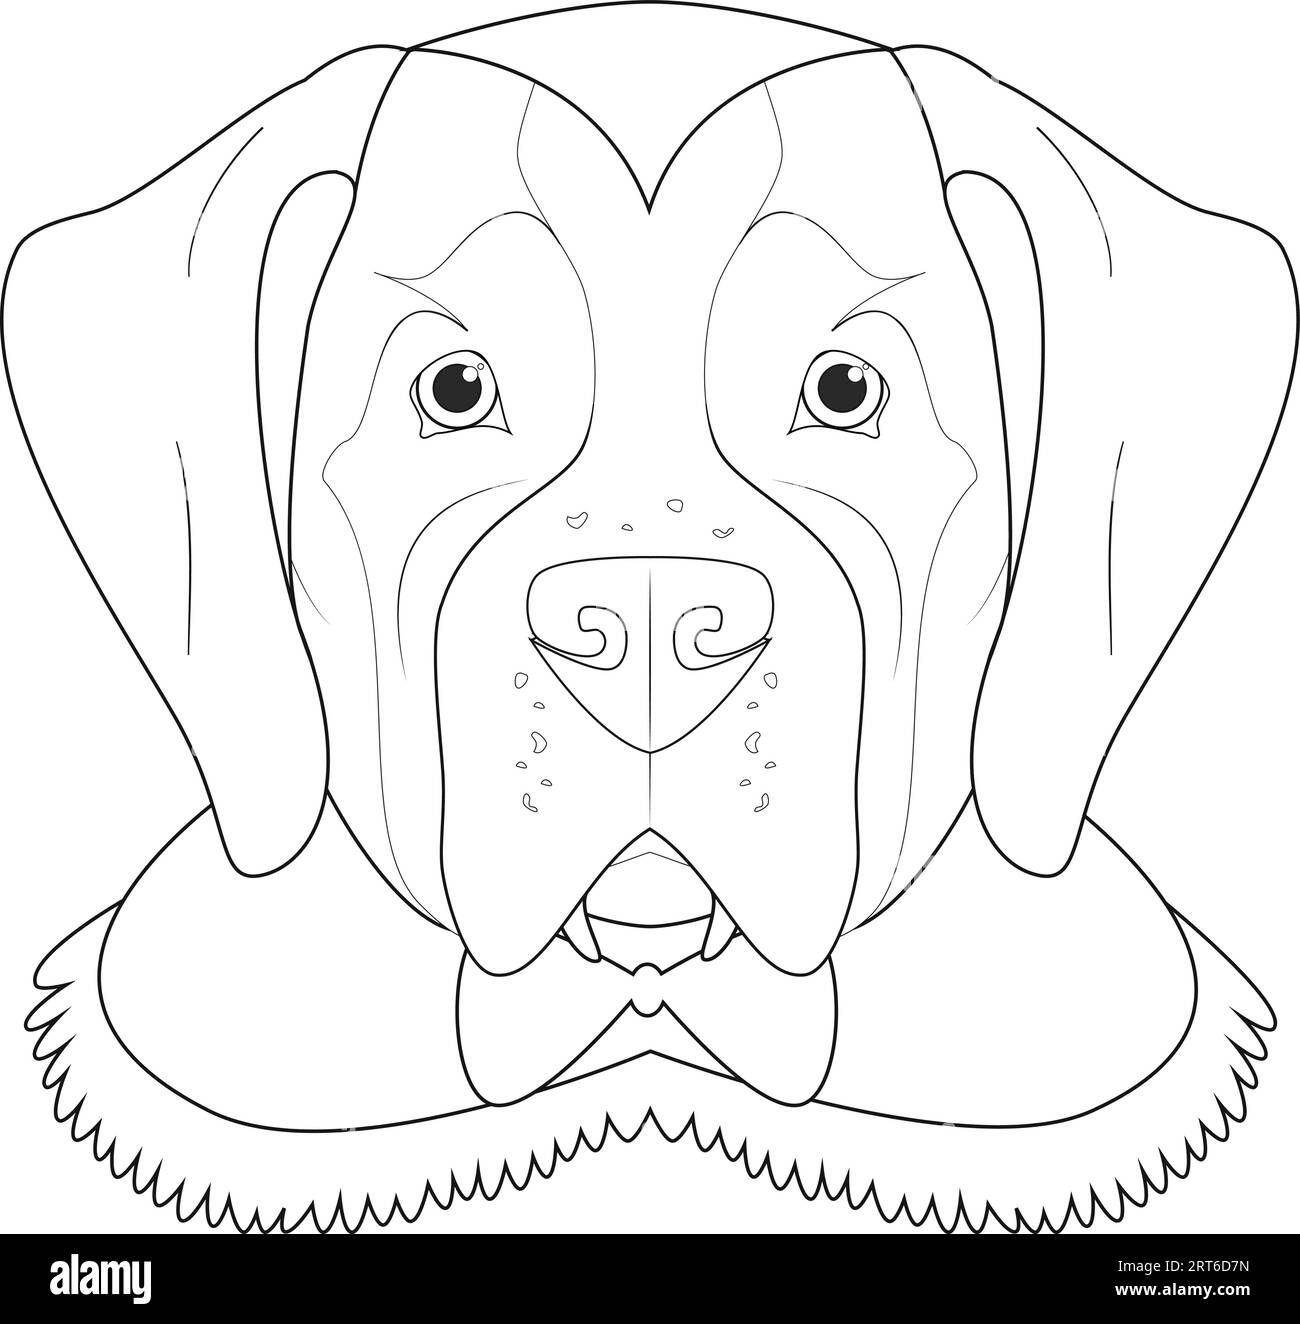 Halloween greeting card for coloring. Saint Bernard dog dressed as a vampire with fangs and cape Stock Vector